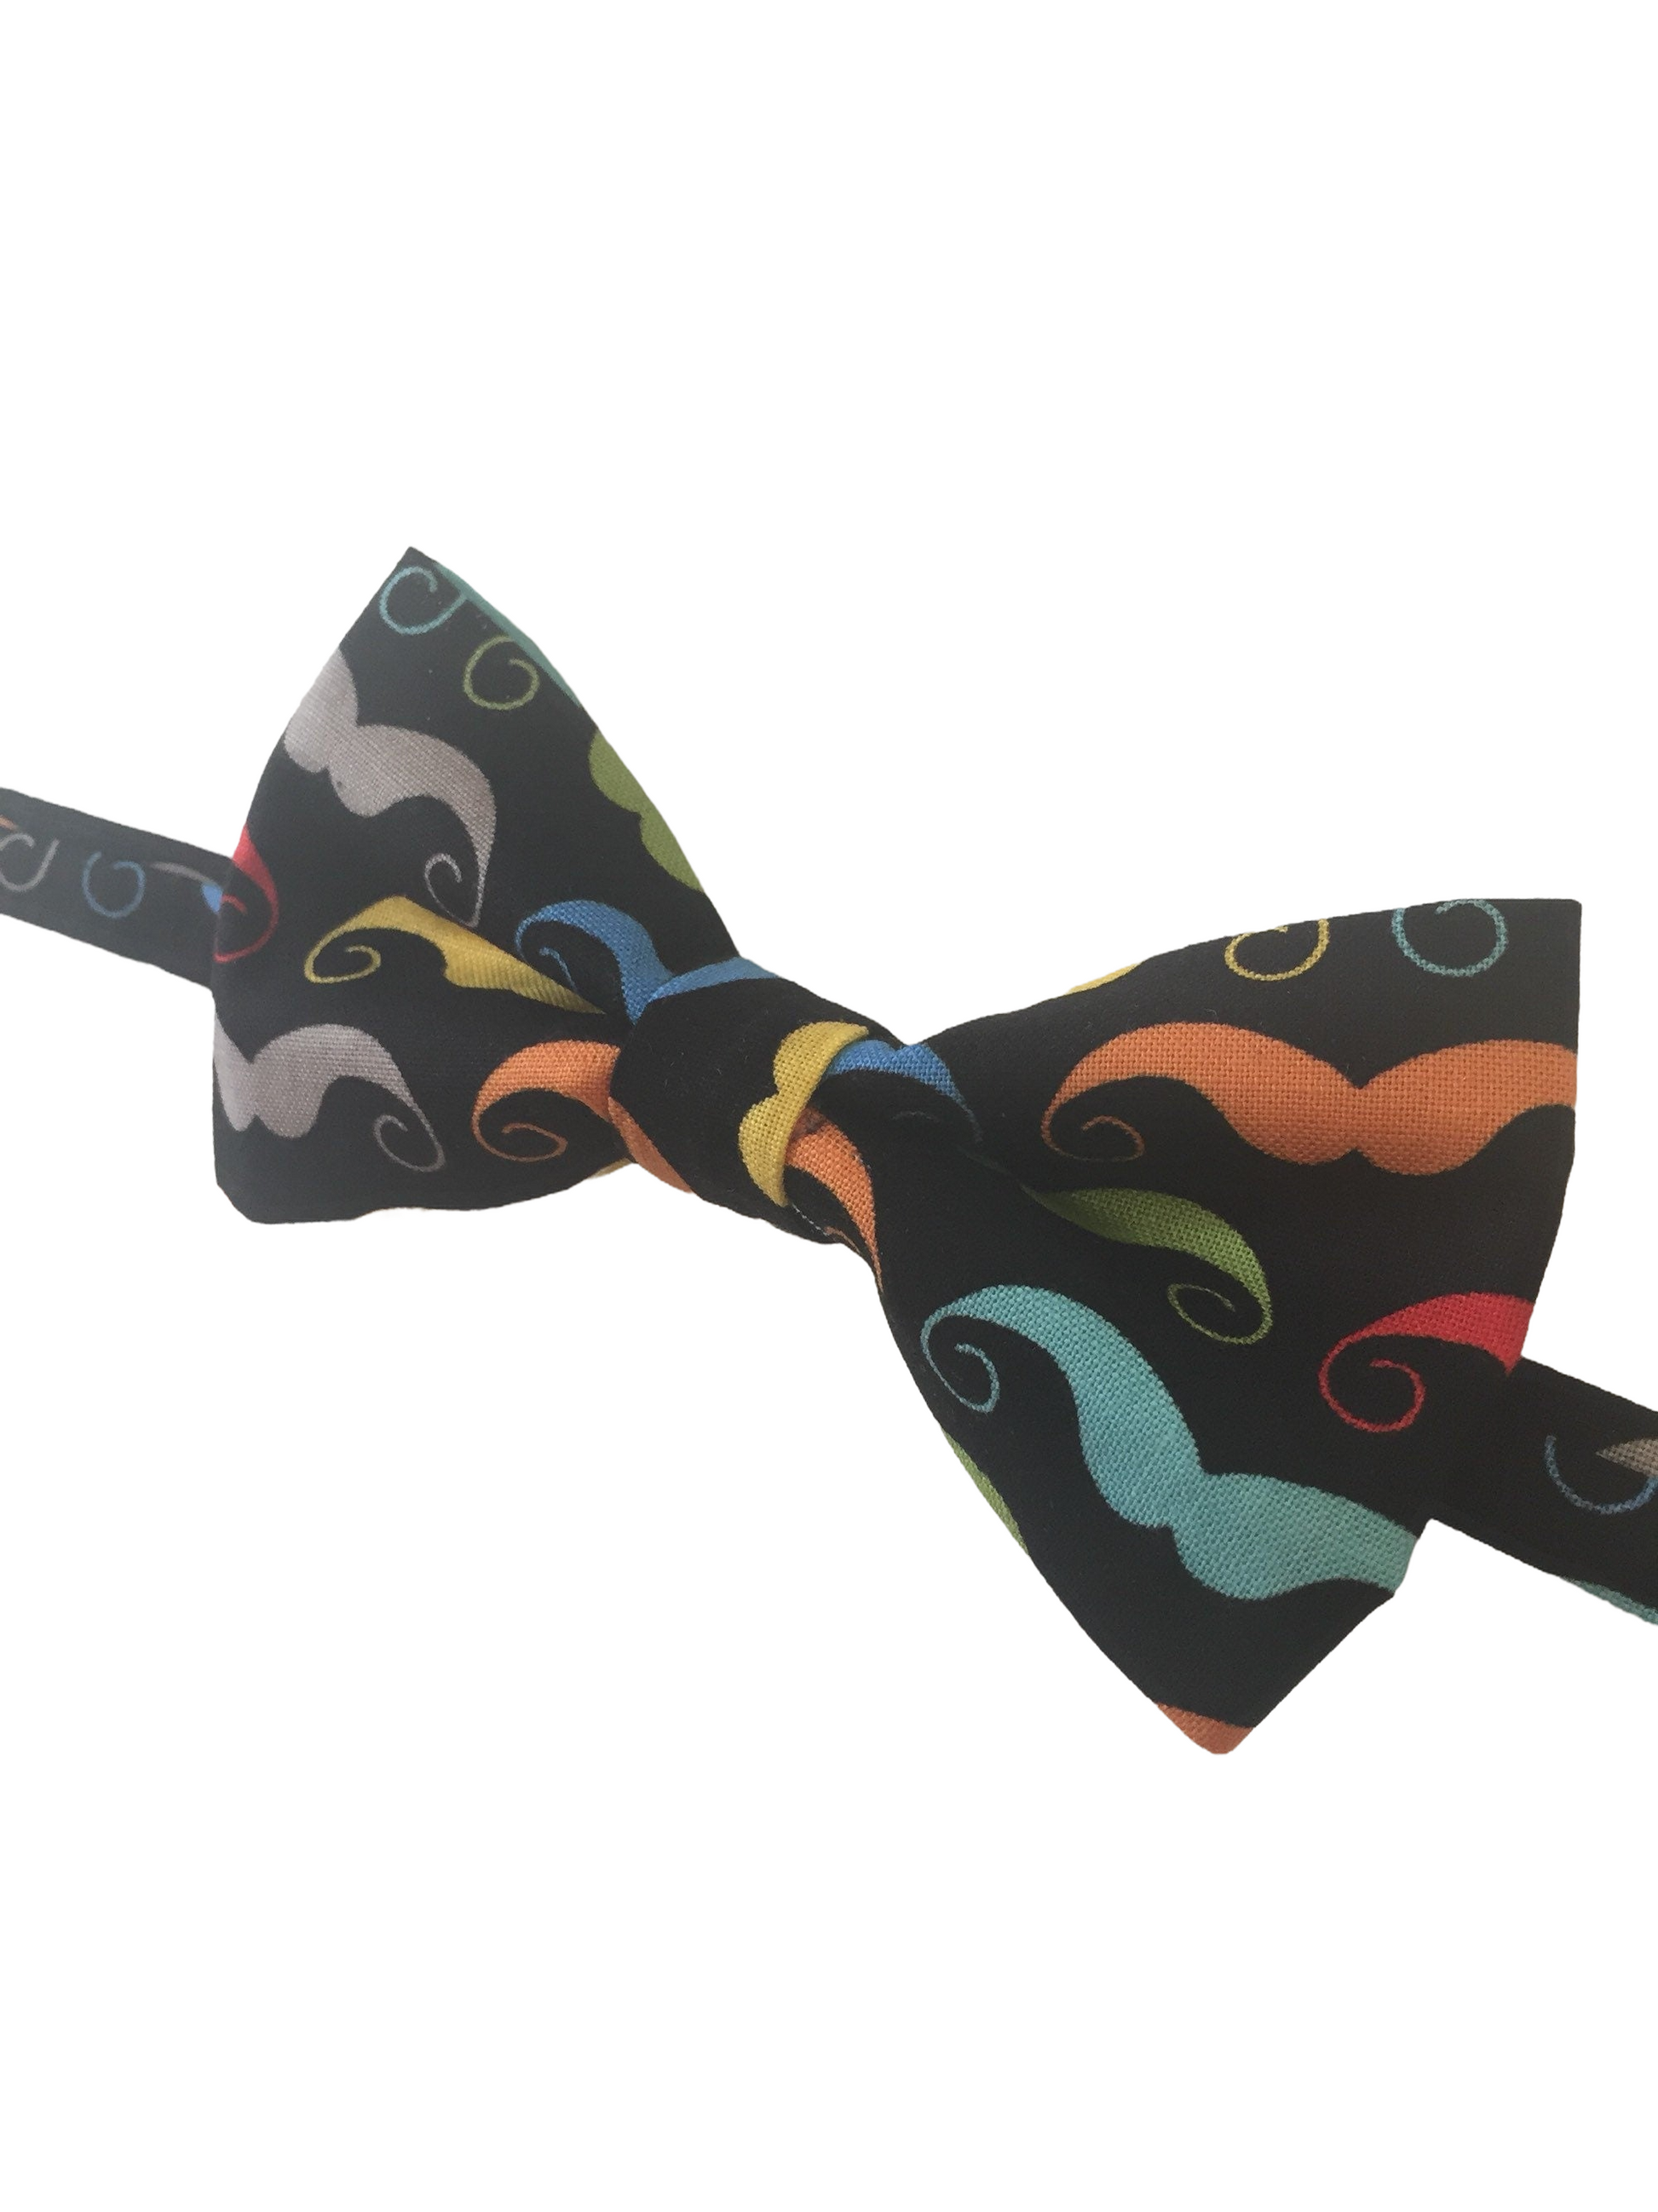 a black bow tie with mustaches on it